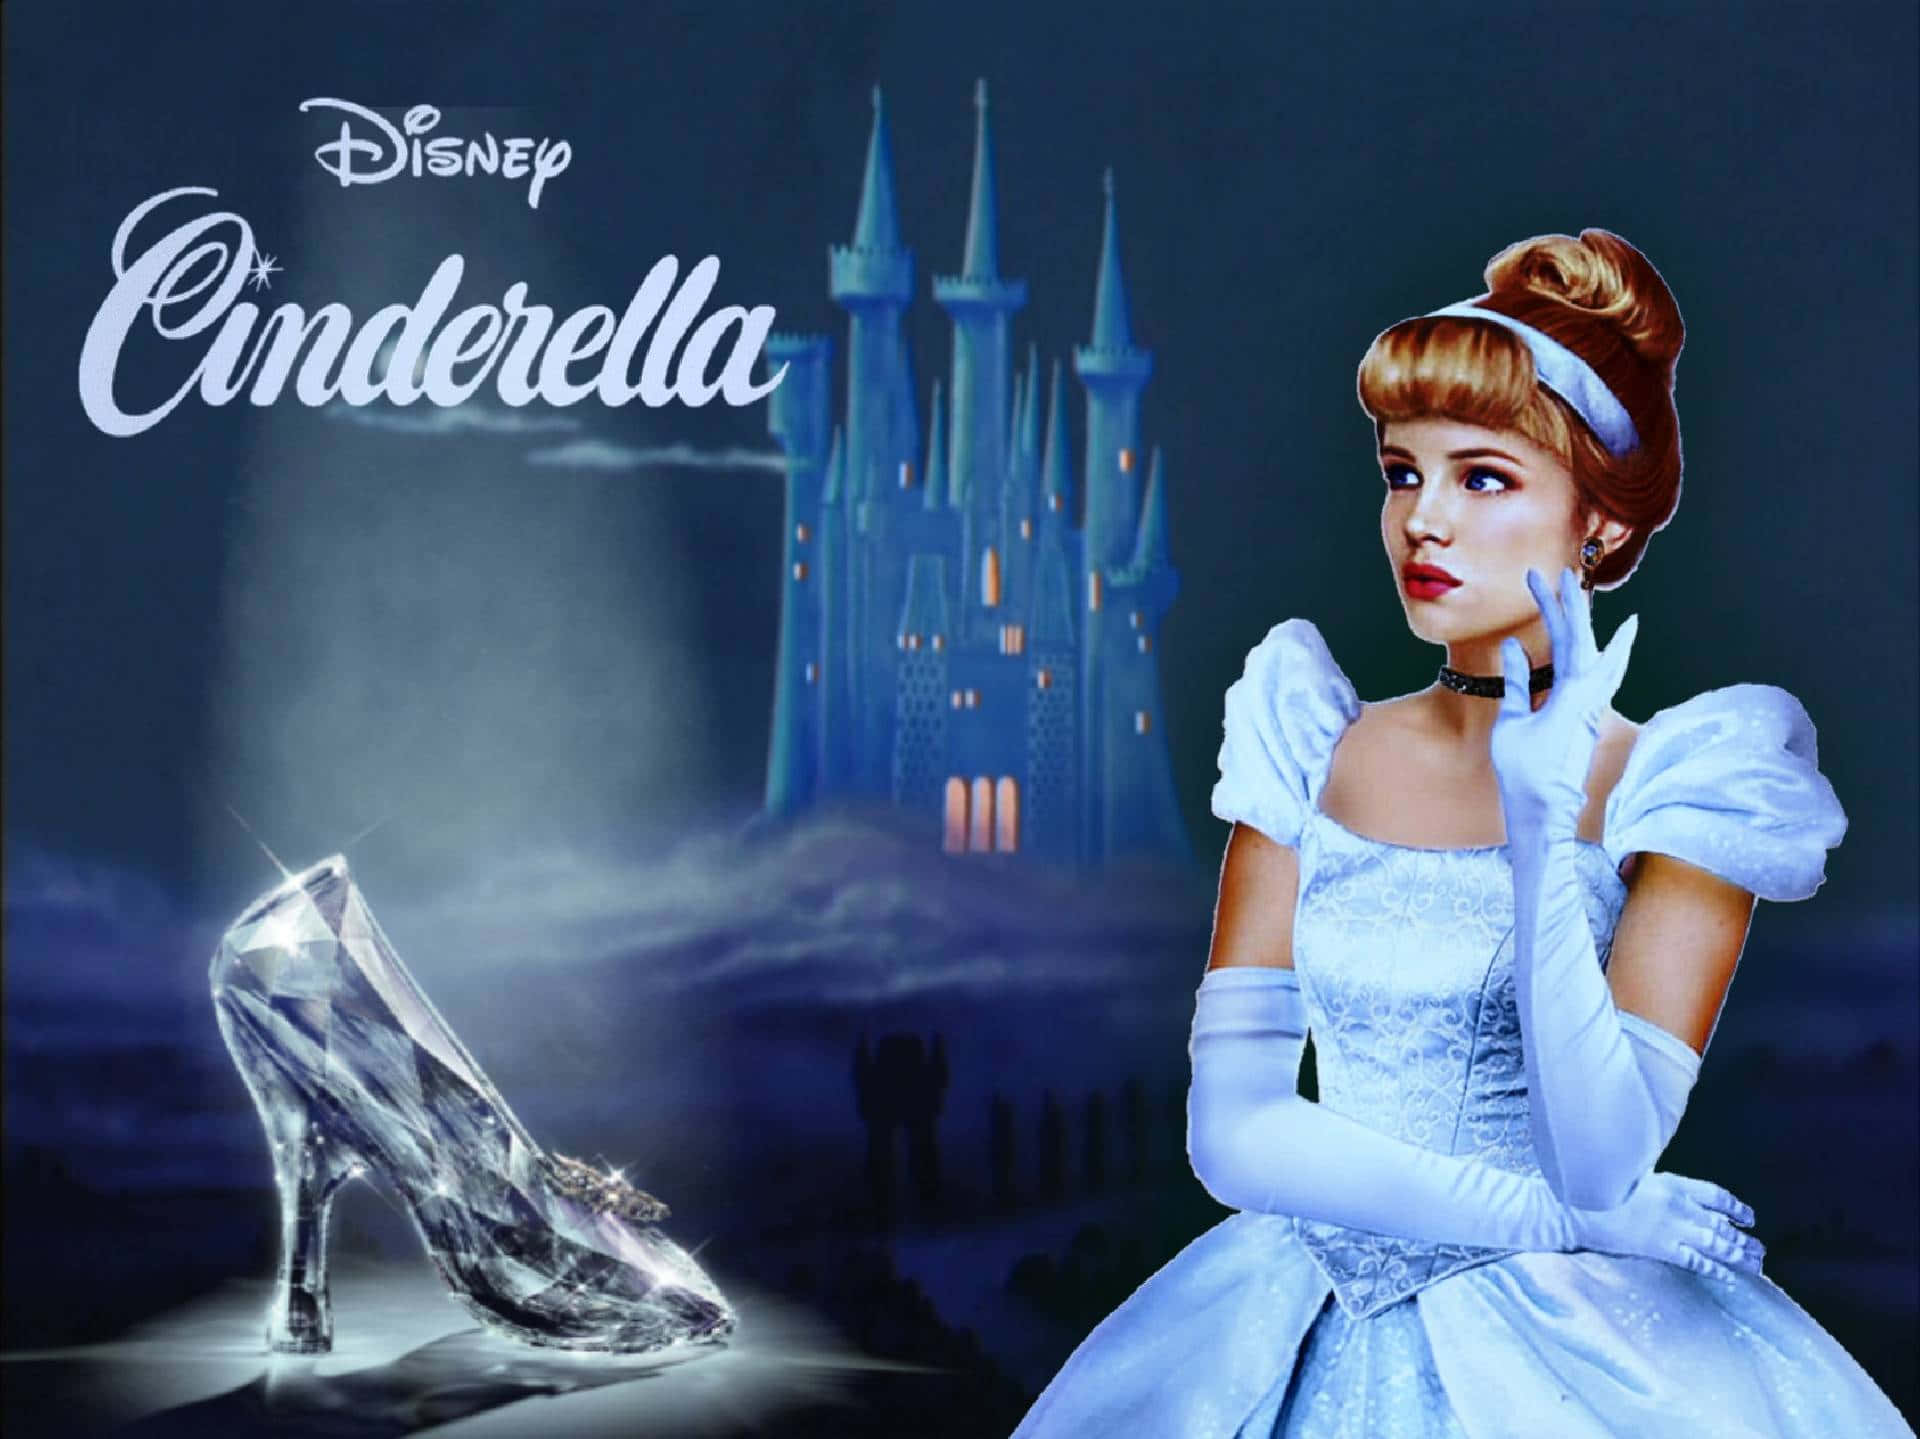 Fairtytale dreams become a reality with Cinderella.